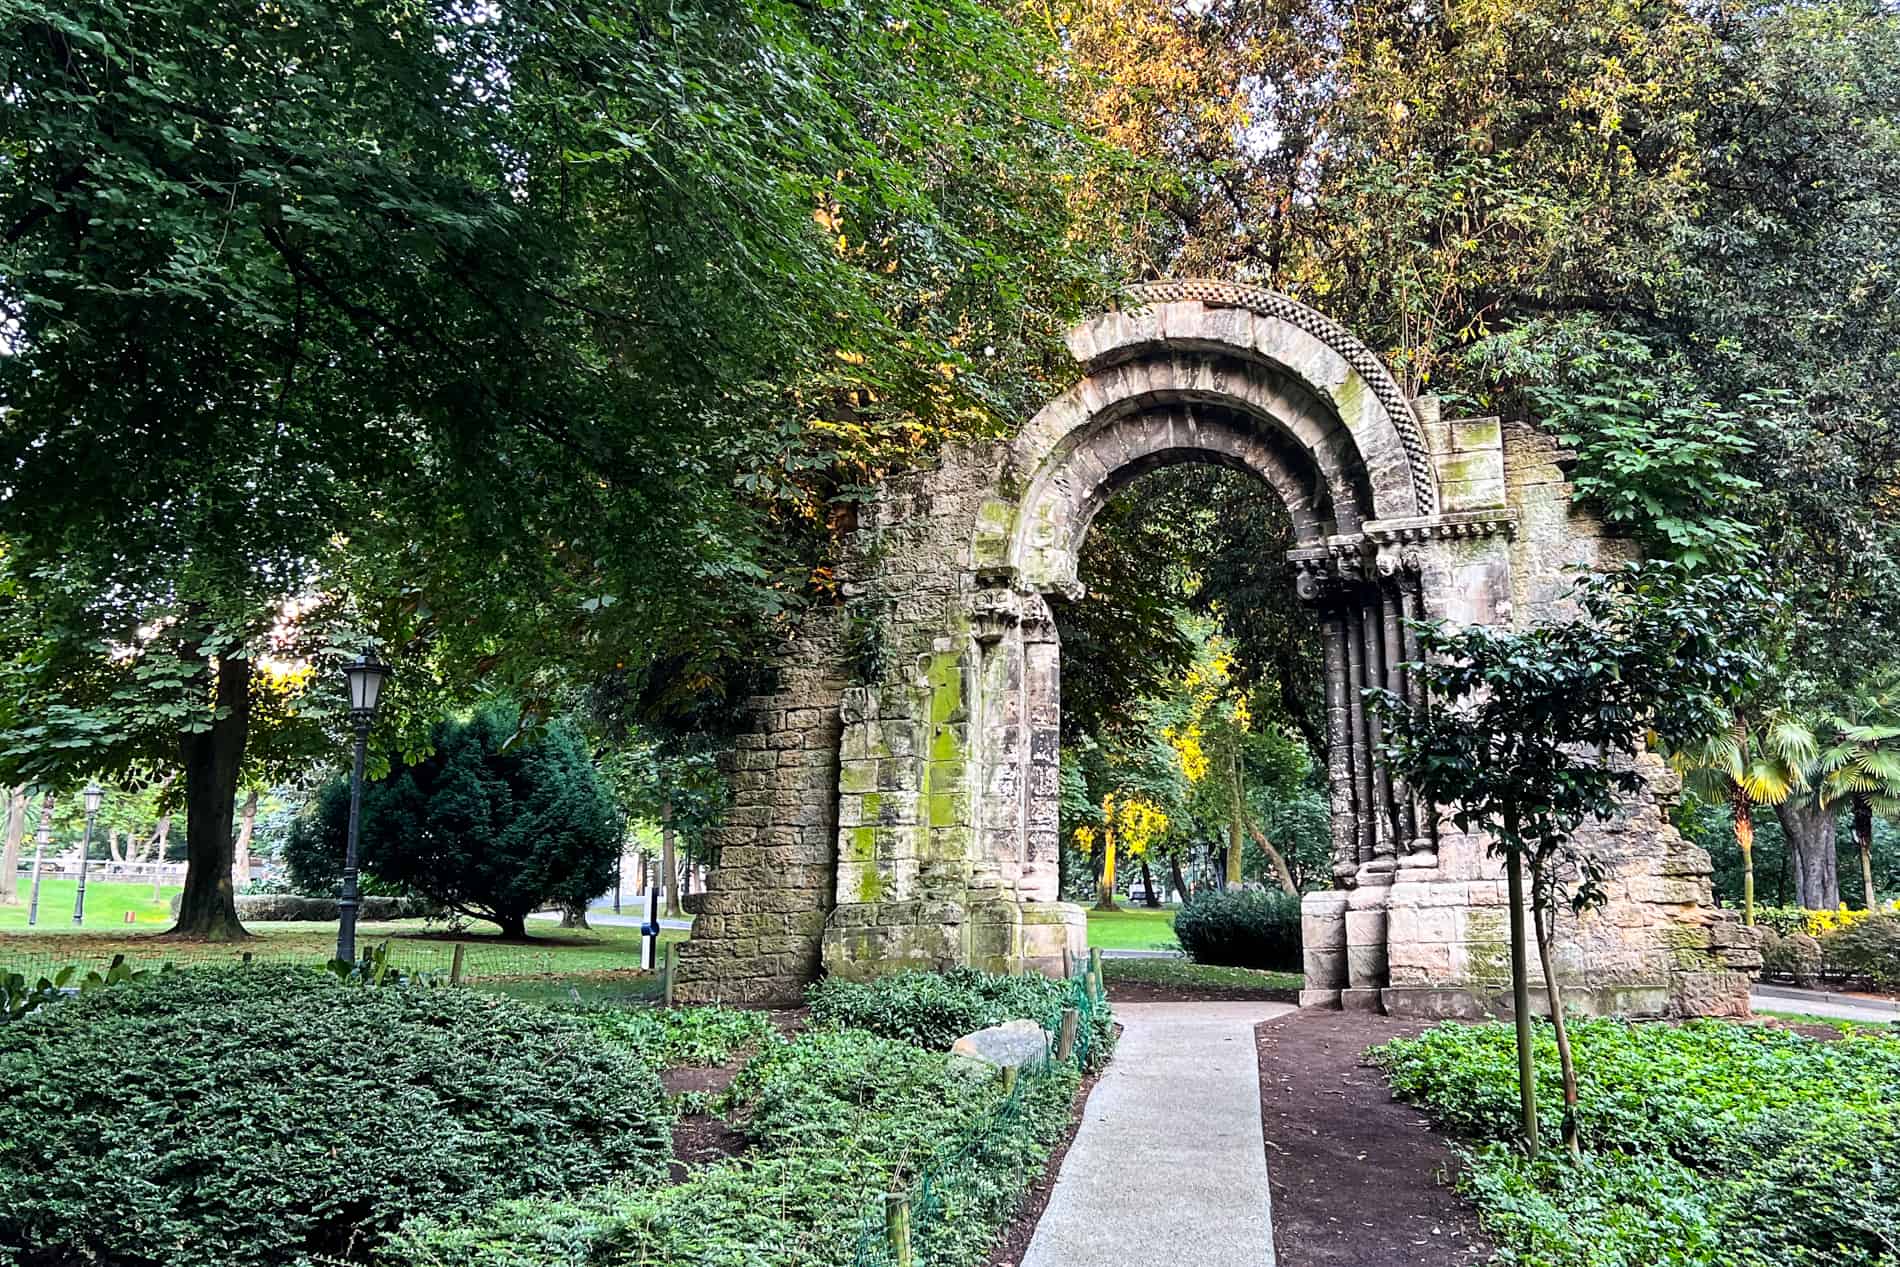 The stone archway ruins of the old San Isidoro Church in the lush green Campo de San Francisco park in Oviedo.